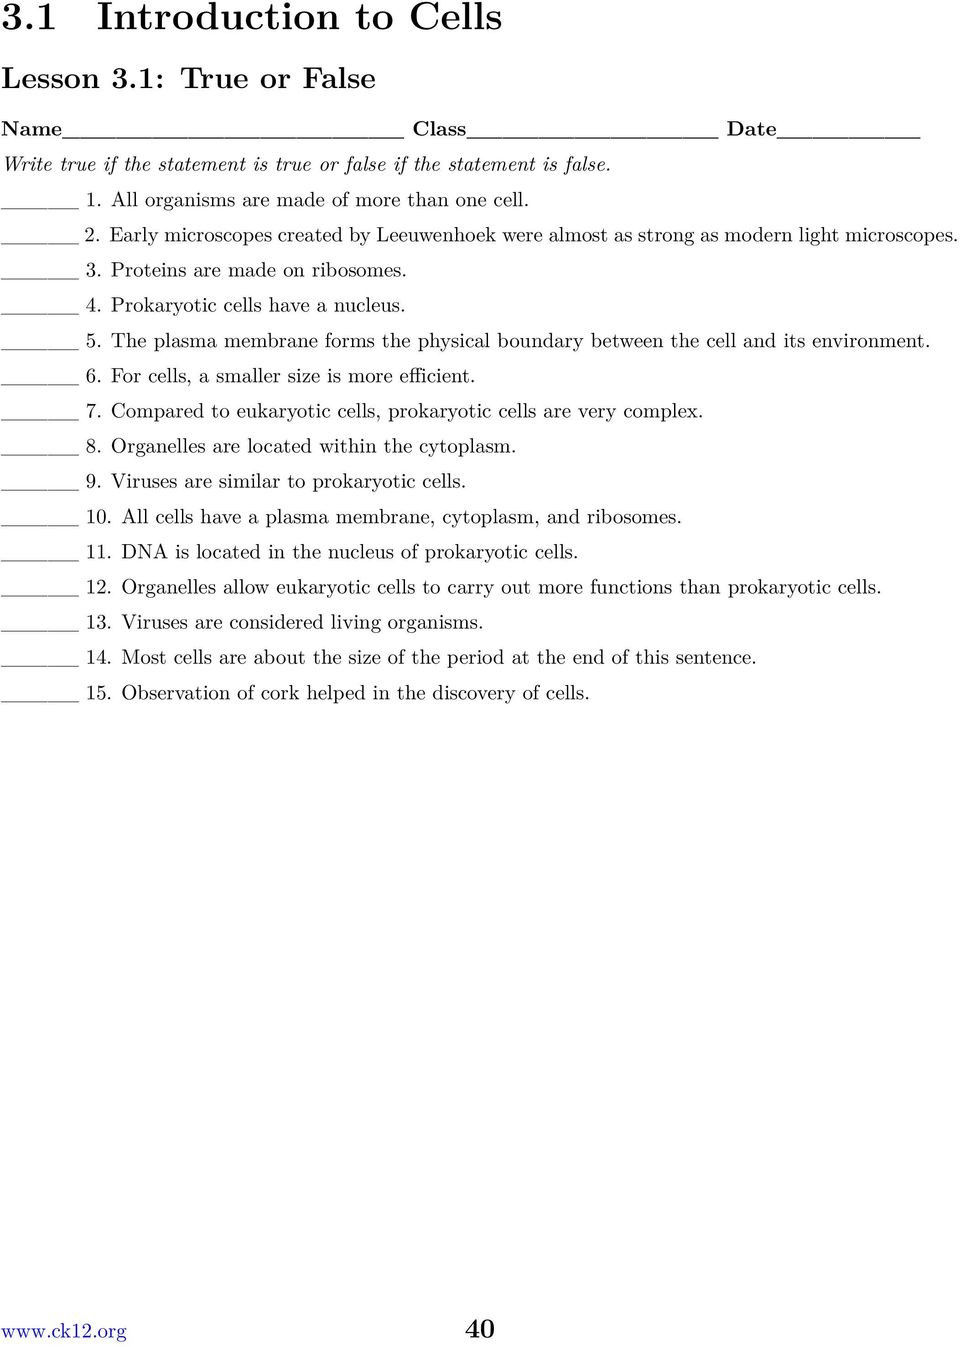 Cells and their organelles Worksheet Chapter 3 Cellular Structure and Function Worksheets Pdf